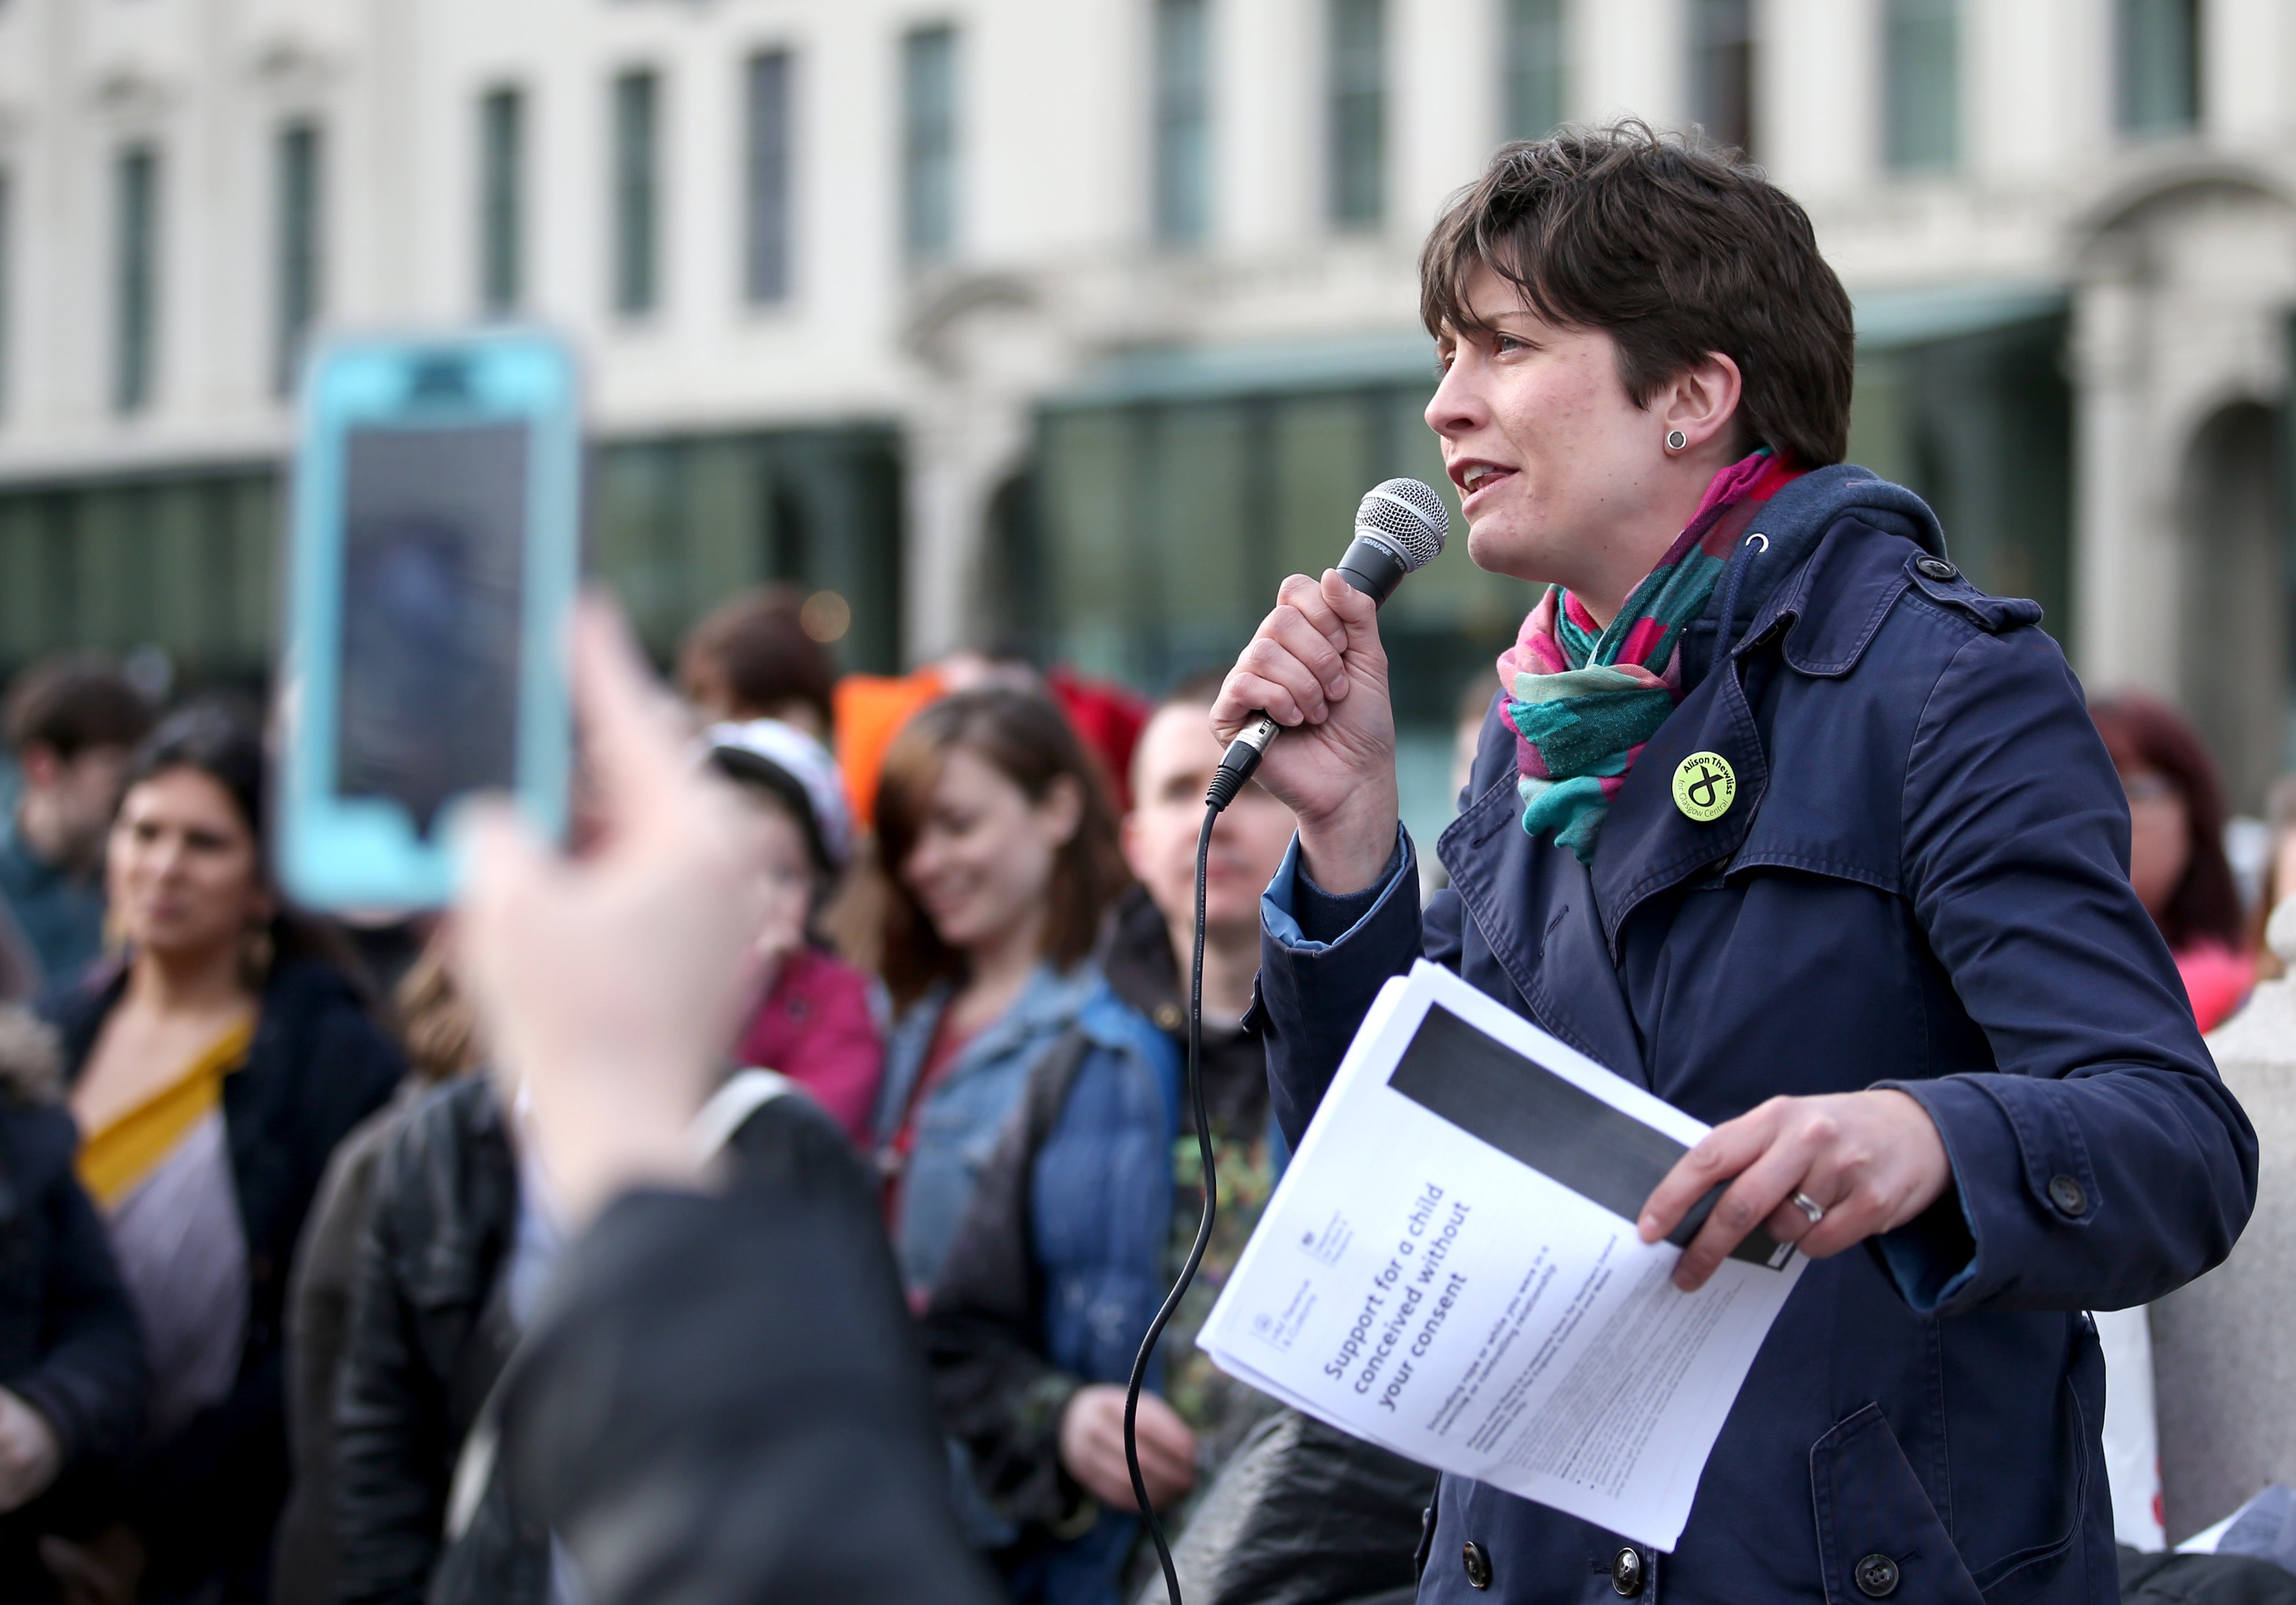 SNP MP Alison Thewliss demanded action from the UK Government. (Jane Barlow/PA)